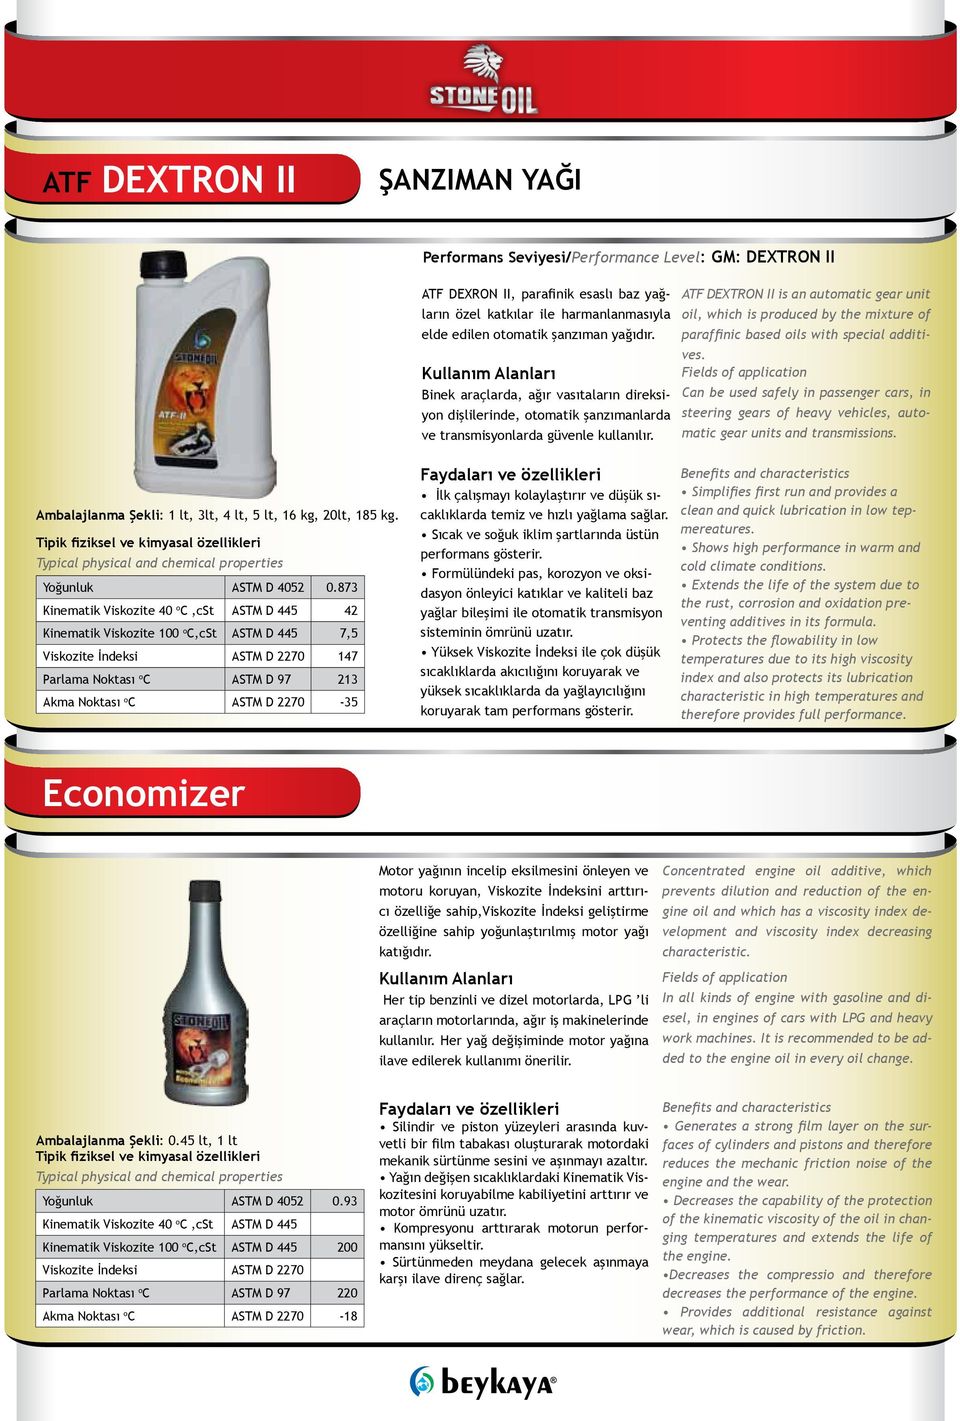 ATF DEXTRON II is an automatic gear unit oil, which is produced by the mixture of paraffinic based oils with special additives.